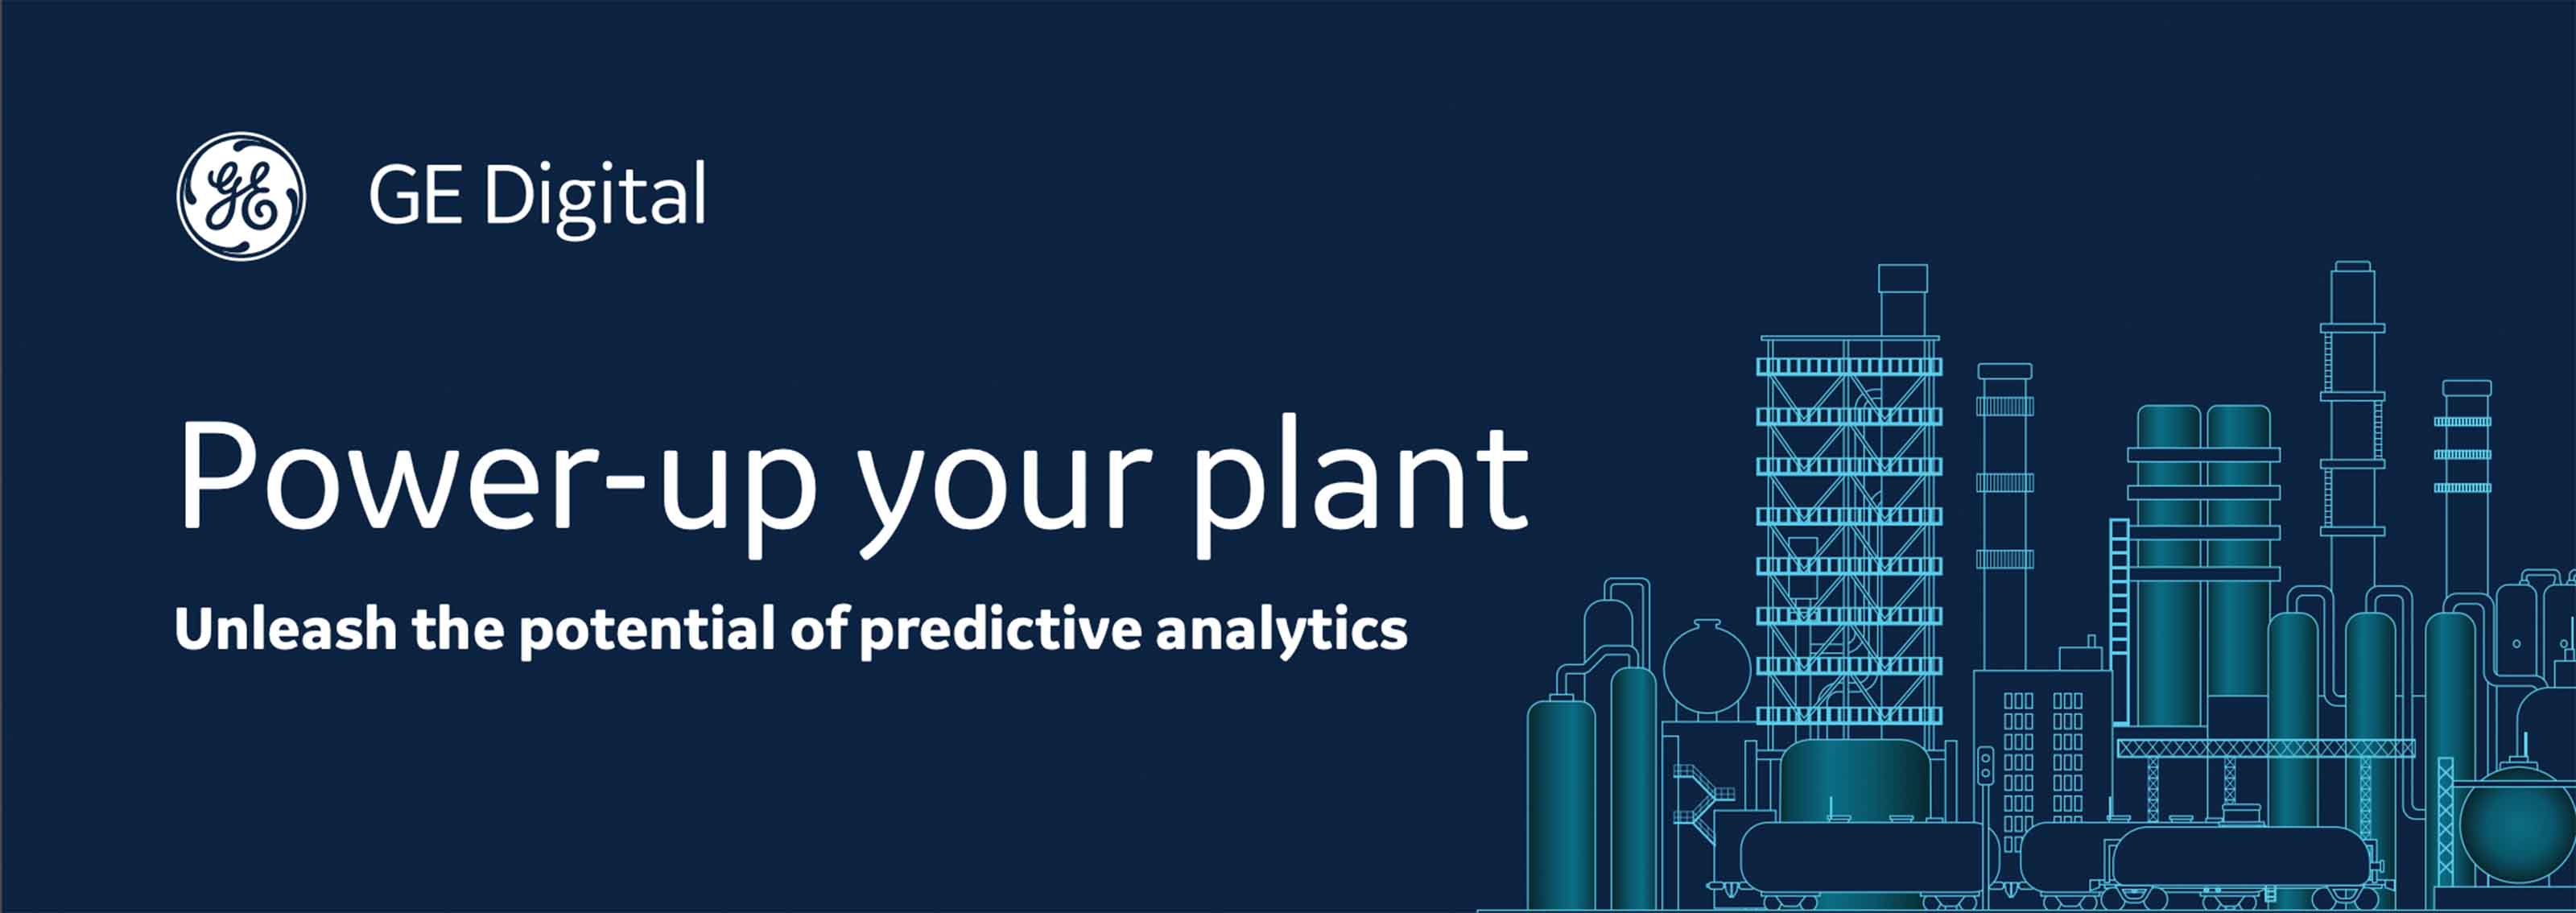 Power-up your plant: Advanced Analytics for Manufacturers Infographic